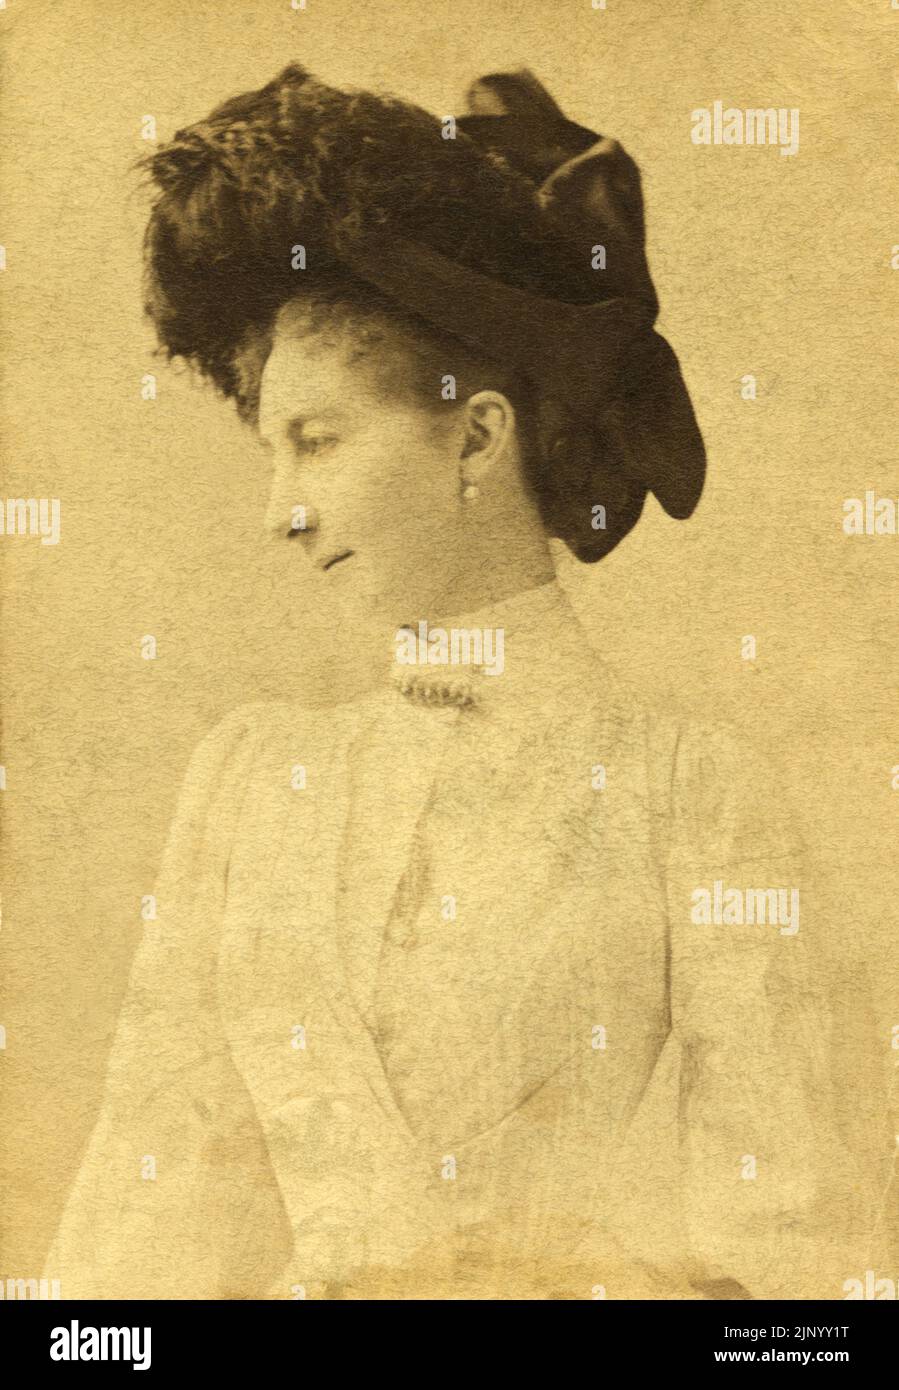 Late 19th Century Vintage Photograph Portrait of young woman in profile posing in photo studio wearing hat and stylish clothing of the period circa 1889 Budapest Stock Photo